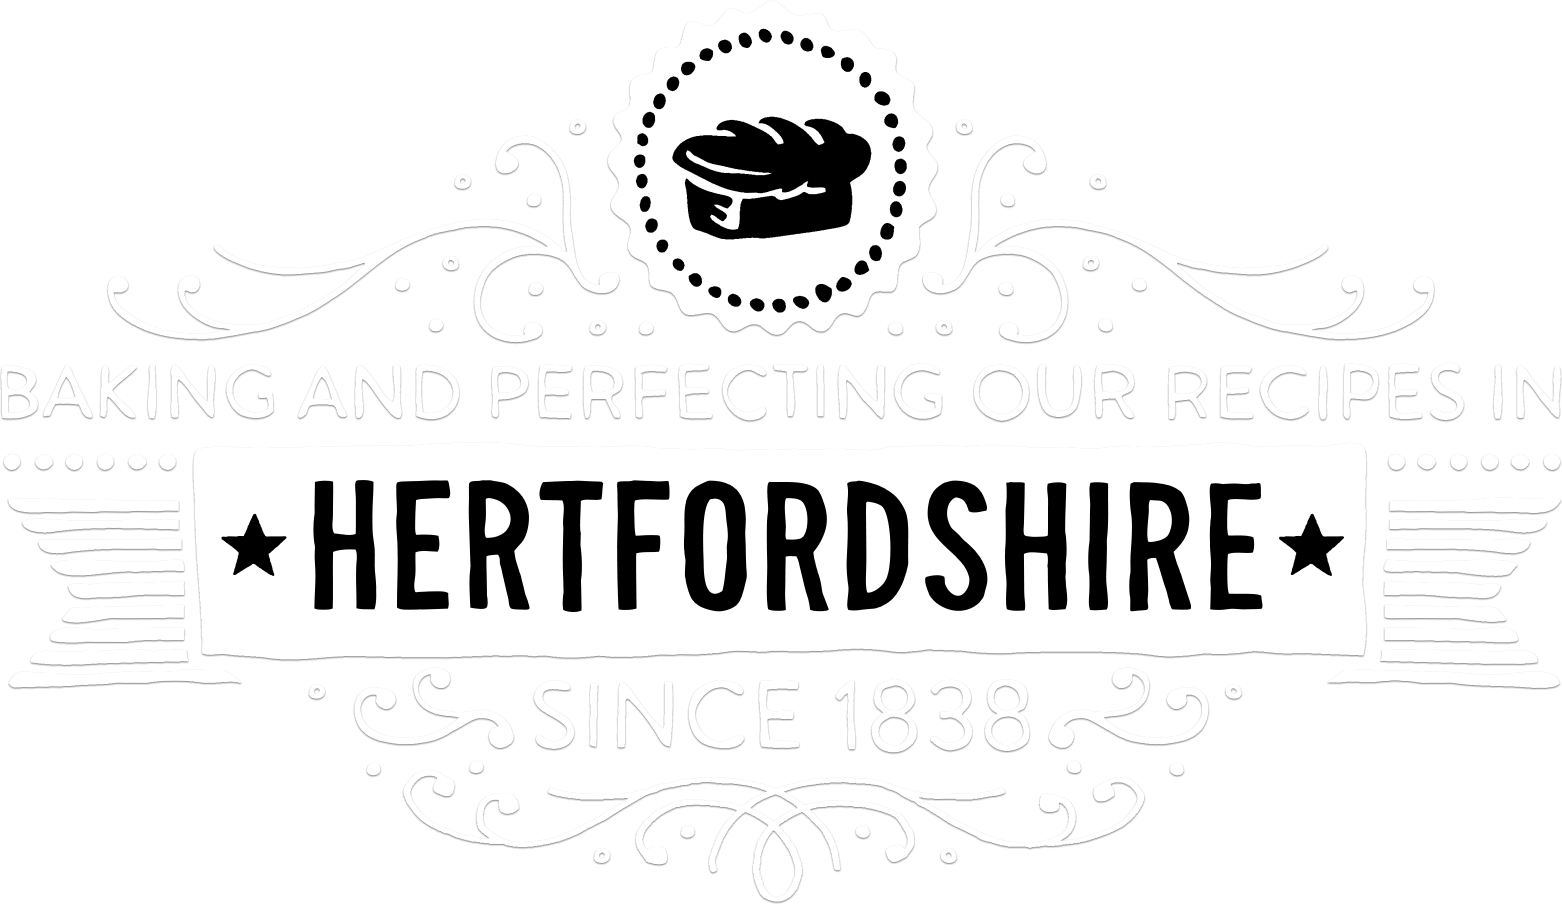 Baking and perfecting our recipes in Hertfordshire since 1838